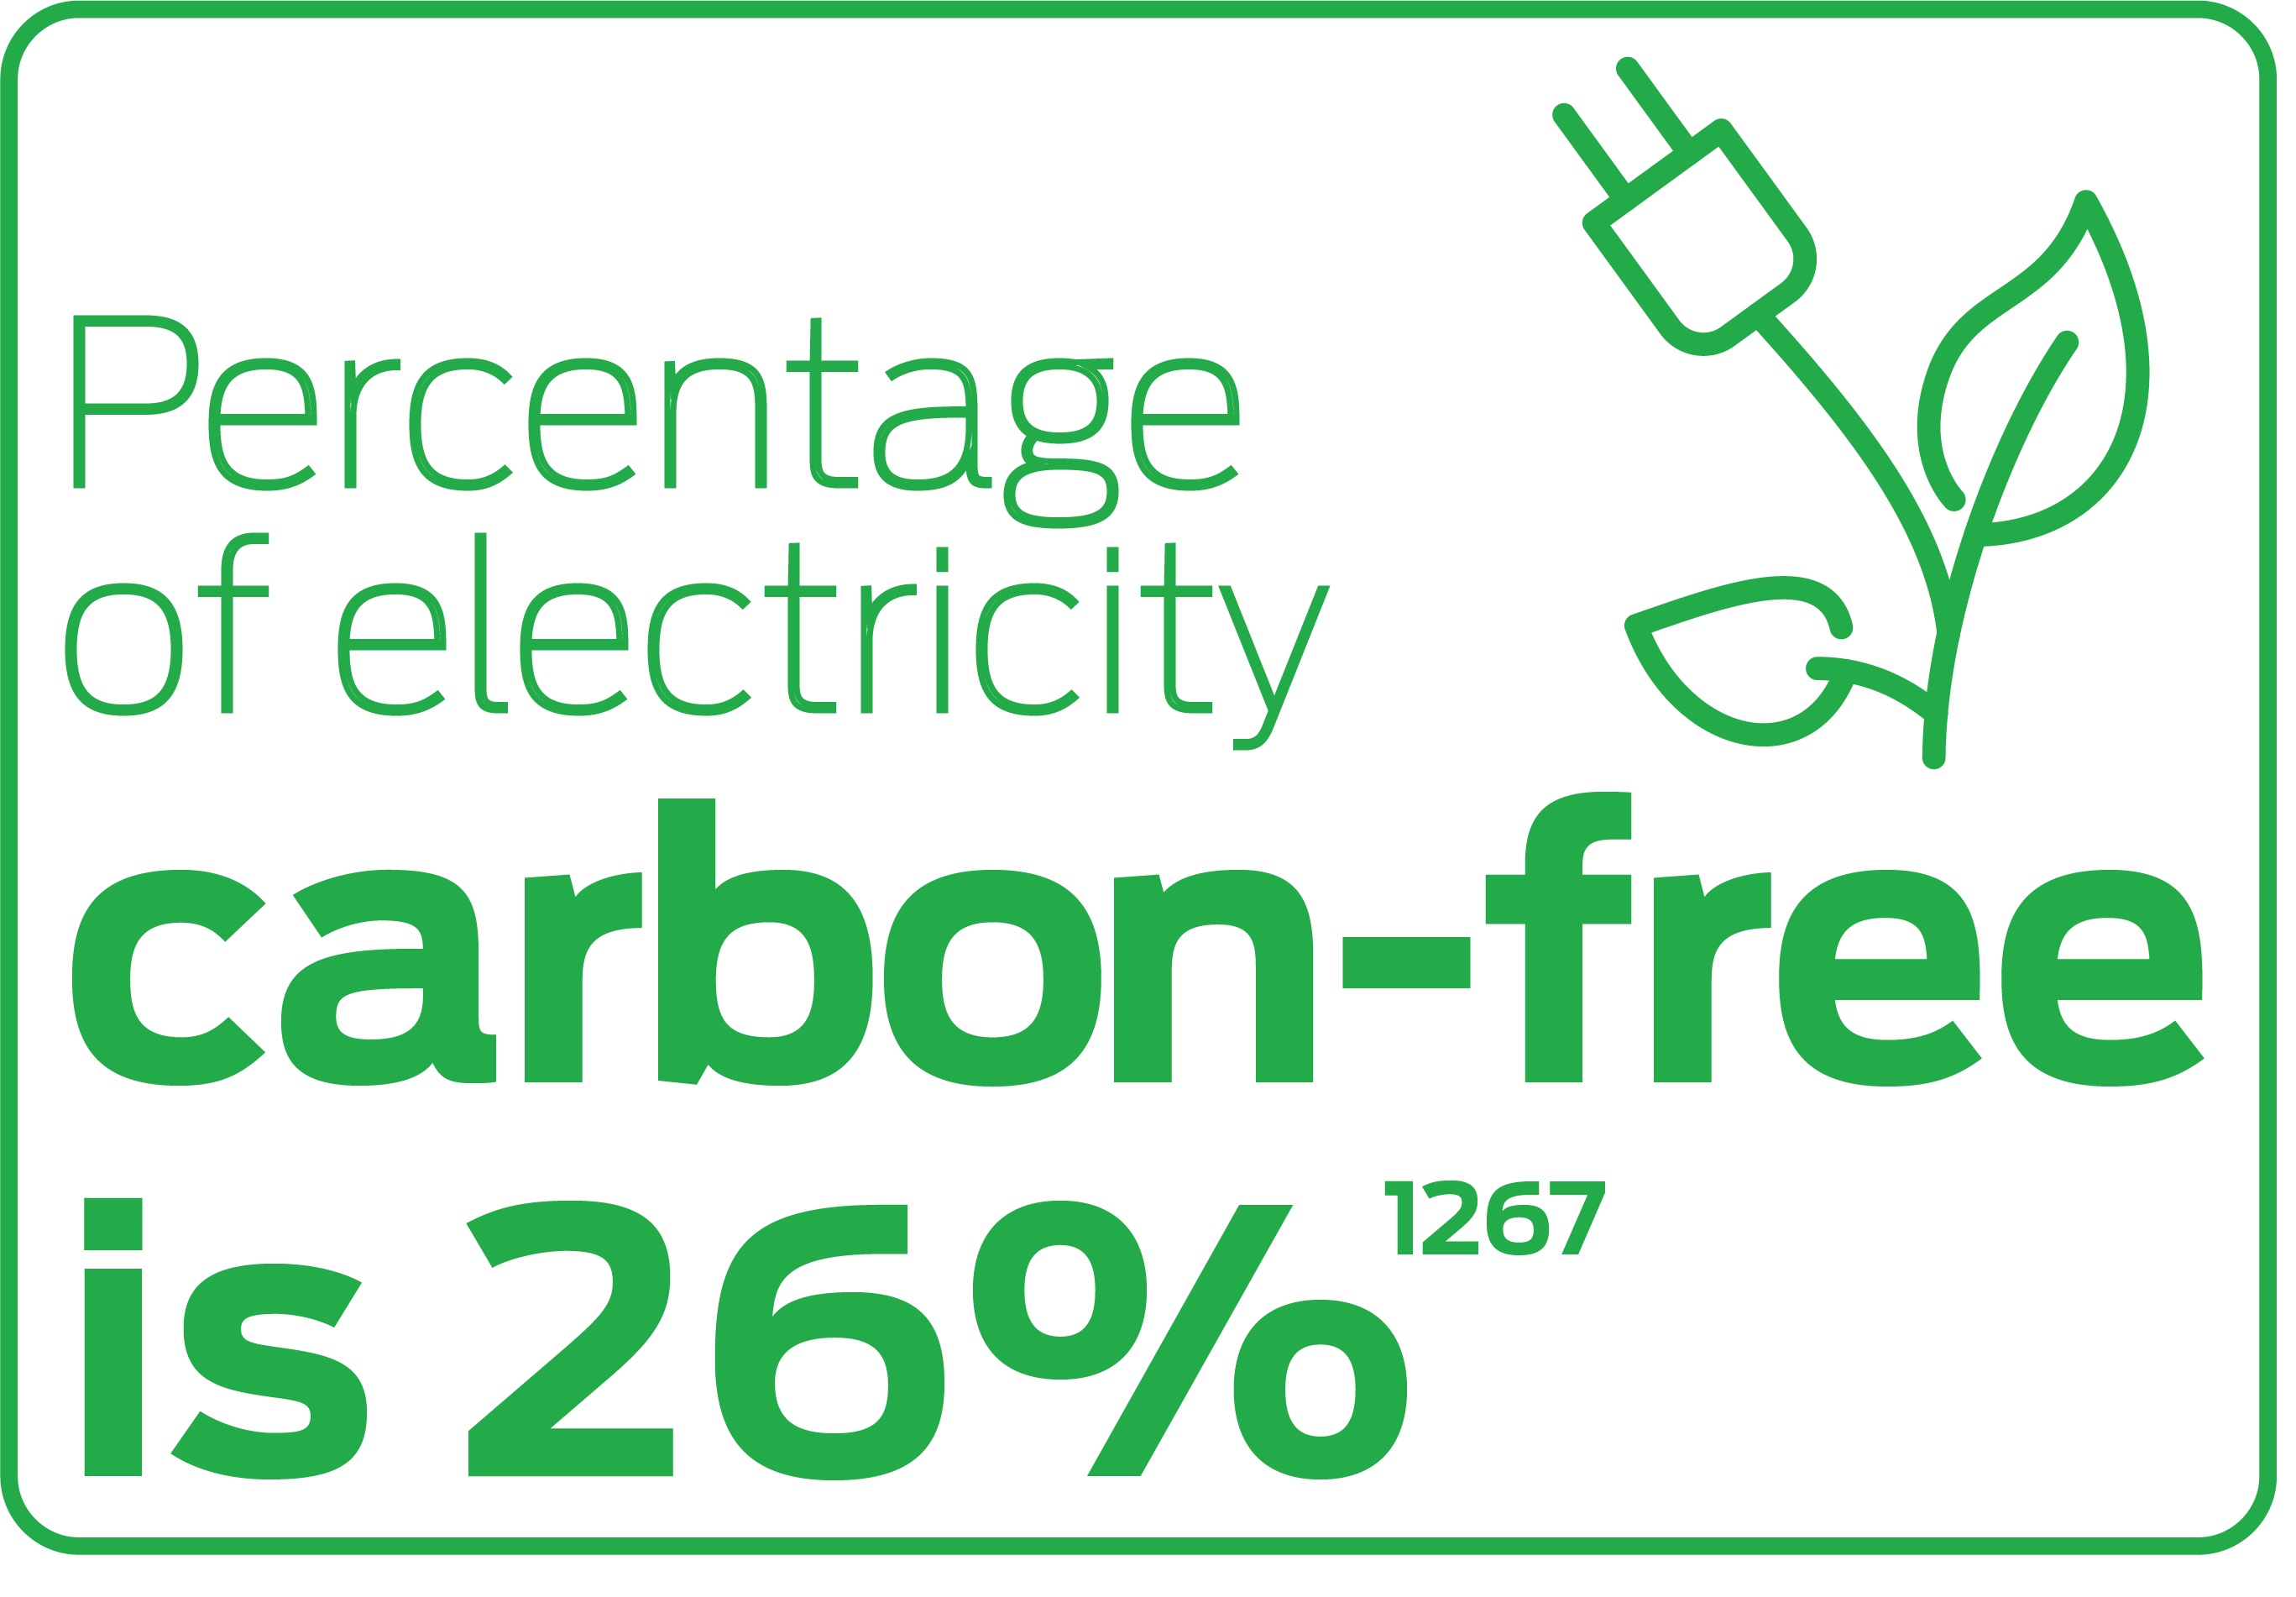 Percentage of electricity carbon-free is 26%